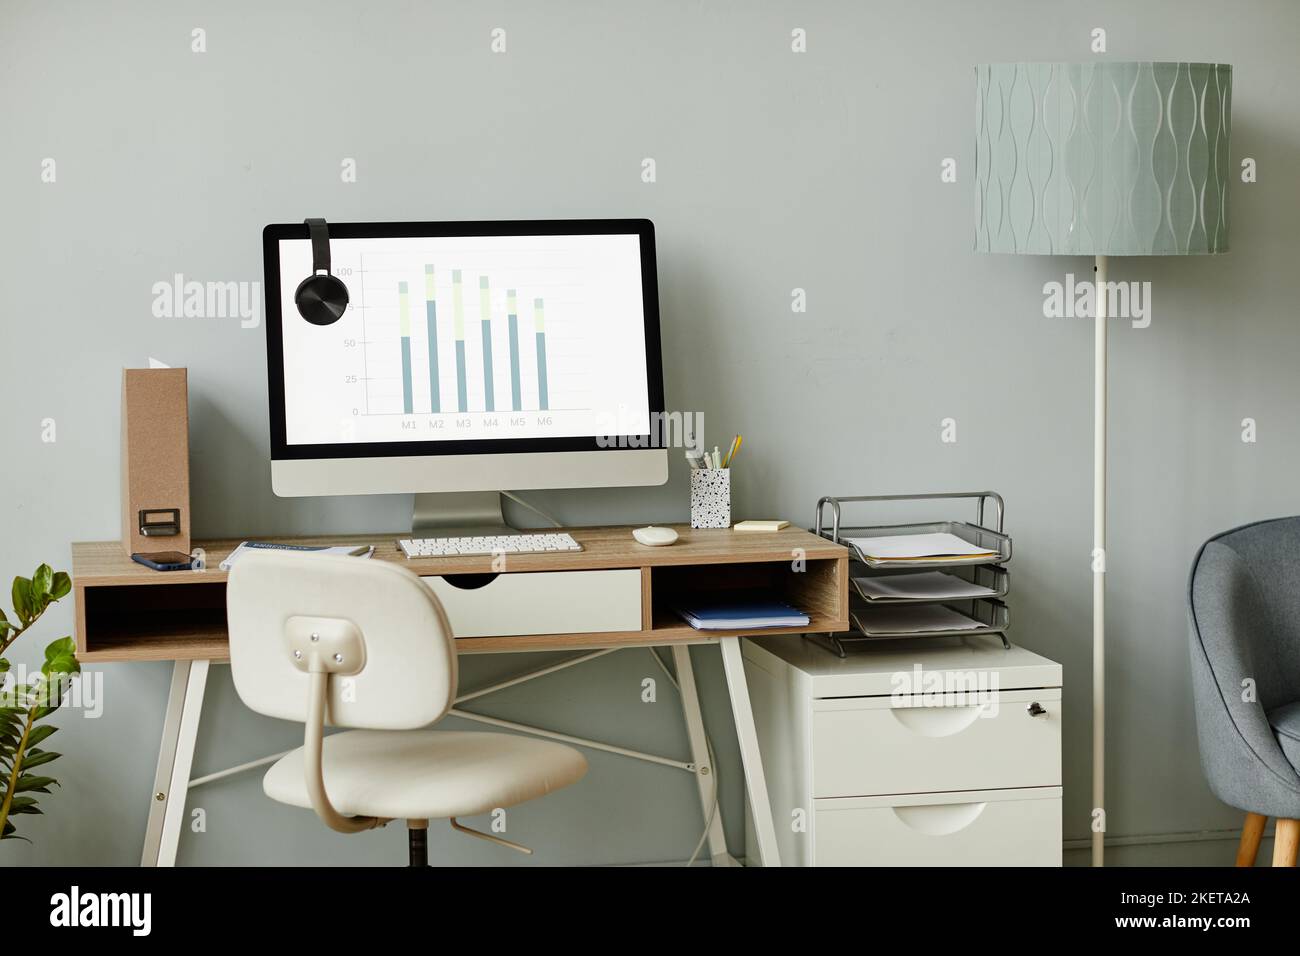 Background image of minimal workplace interior in white tones with PC computer on desk, copy space Stock Photo